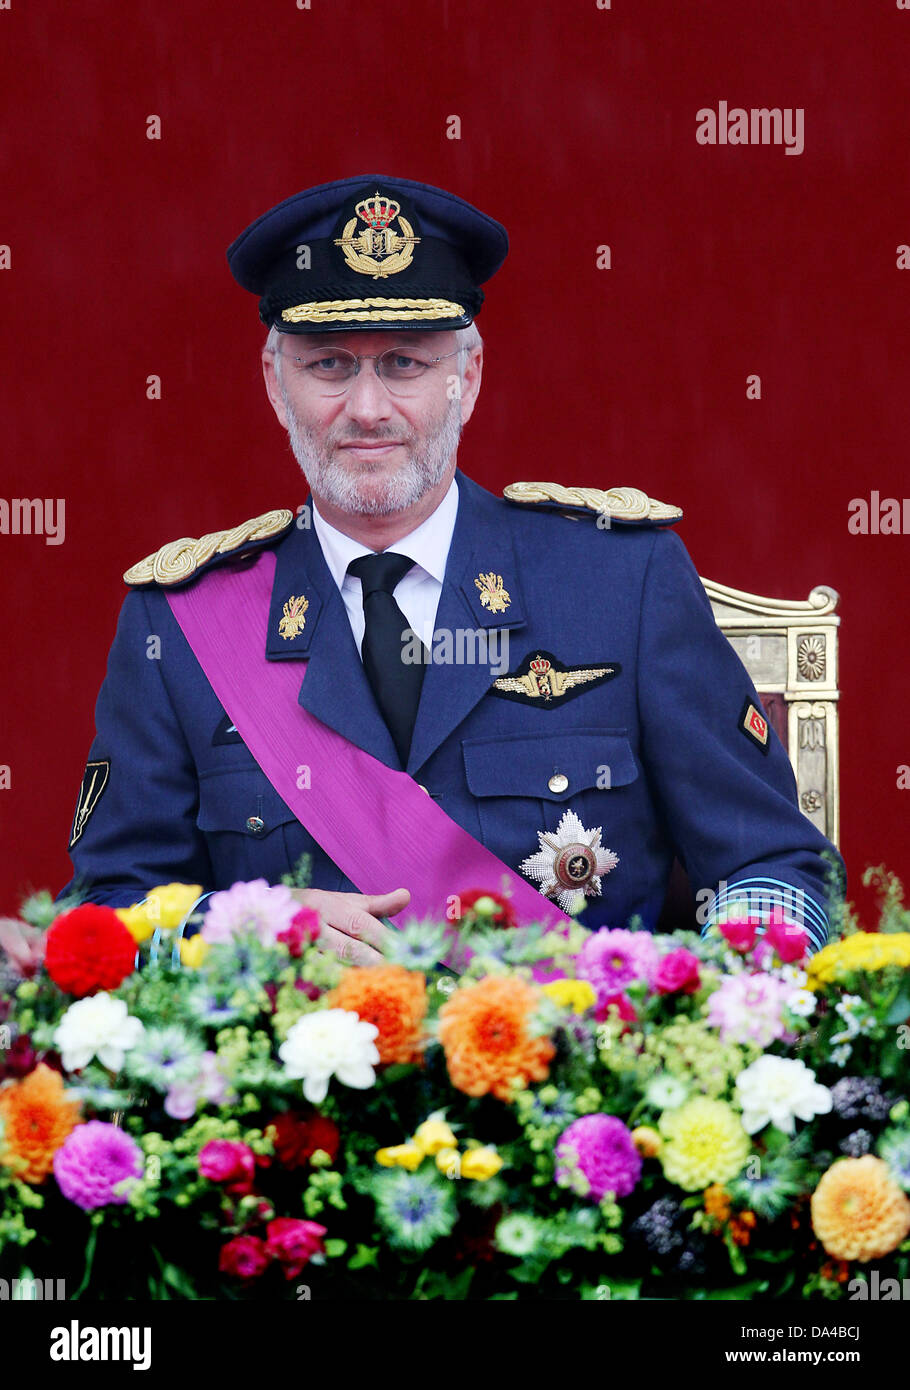 Crown Prince Philippe of Belgium attends a military parade in front of the Royal Palace on National Day in Brussels, Belgium, 21 July 2011. Photo: Patrick van Katwijk Stock Photo